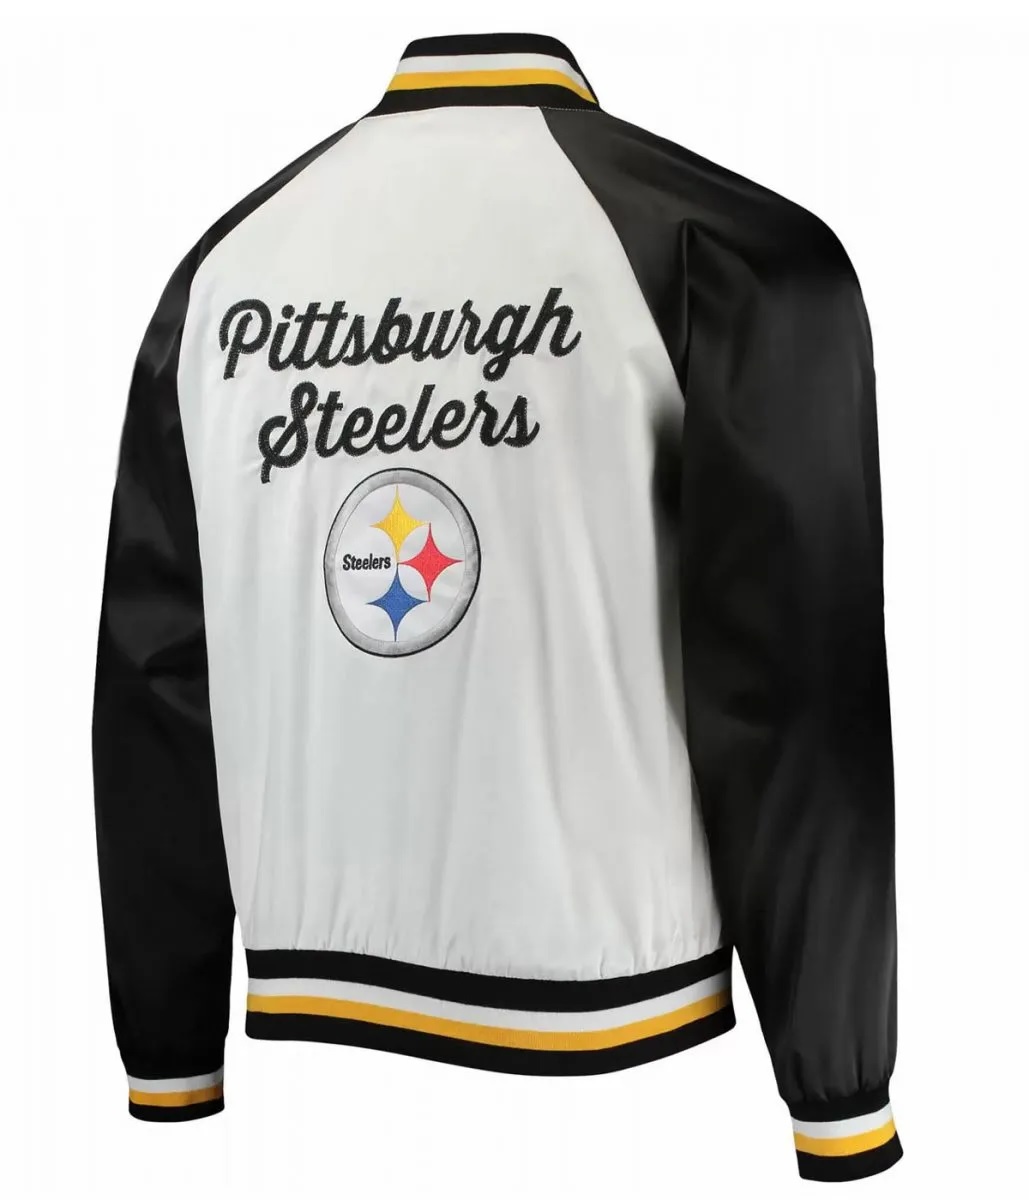 Pittsburgh Steelers NFL Satin White and Black Jacket